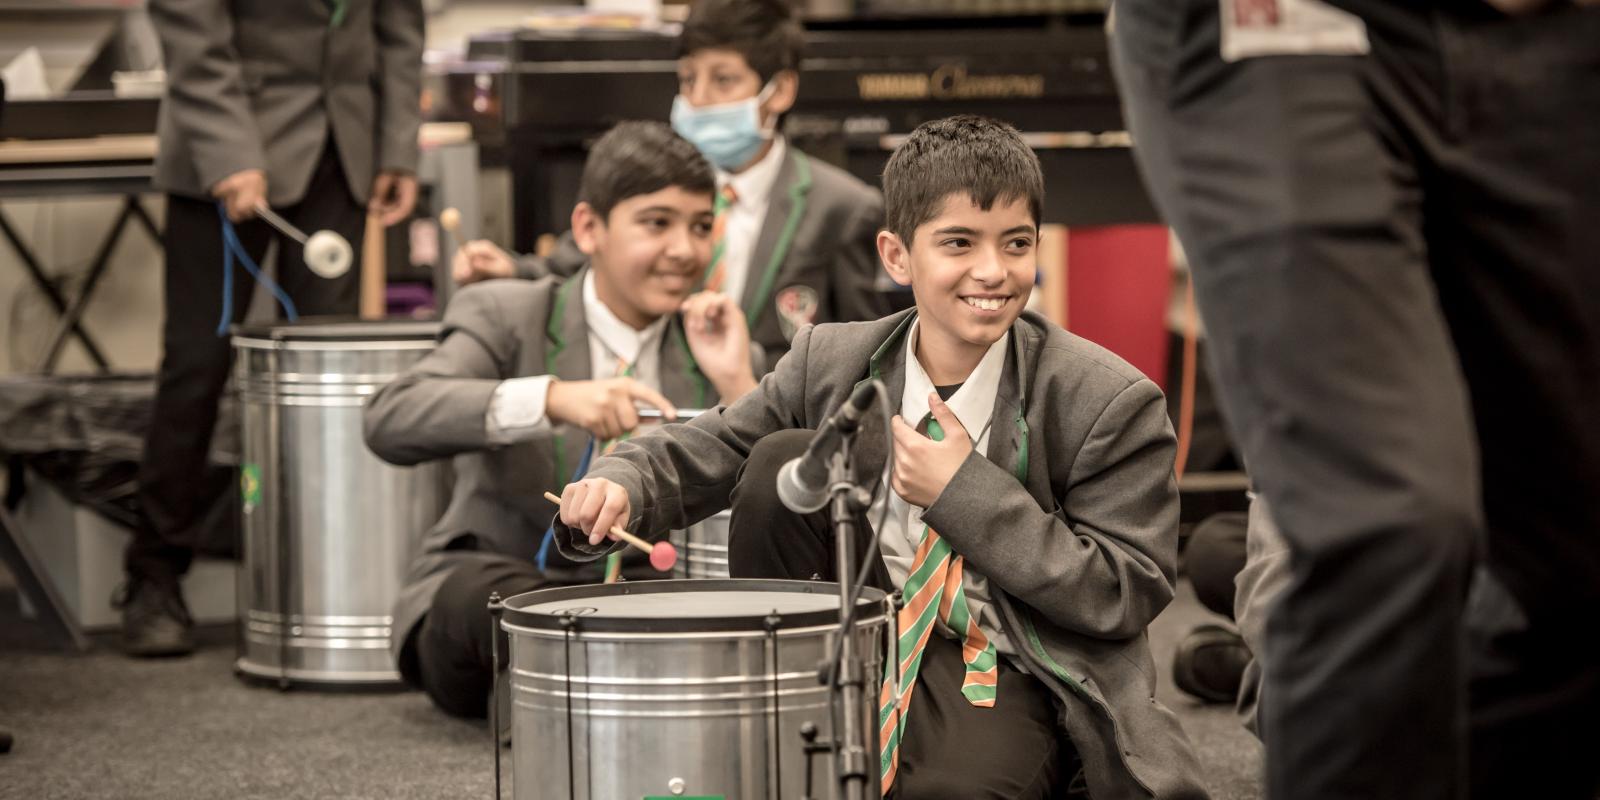 A smiling pupil hits a drum